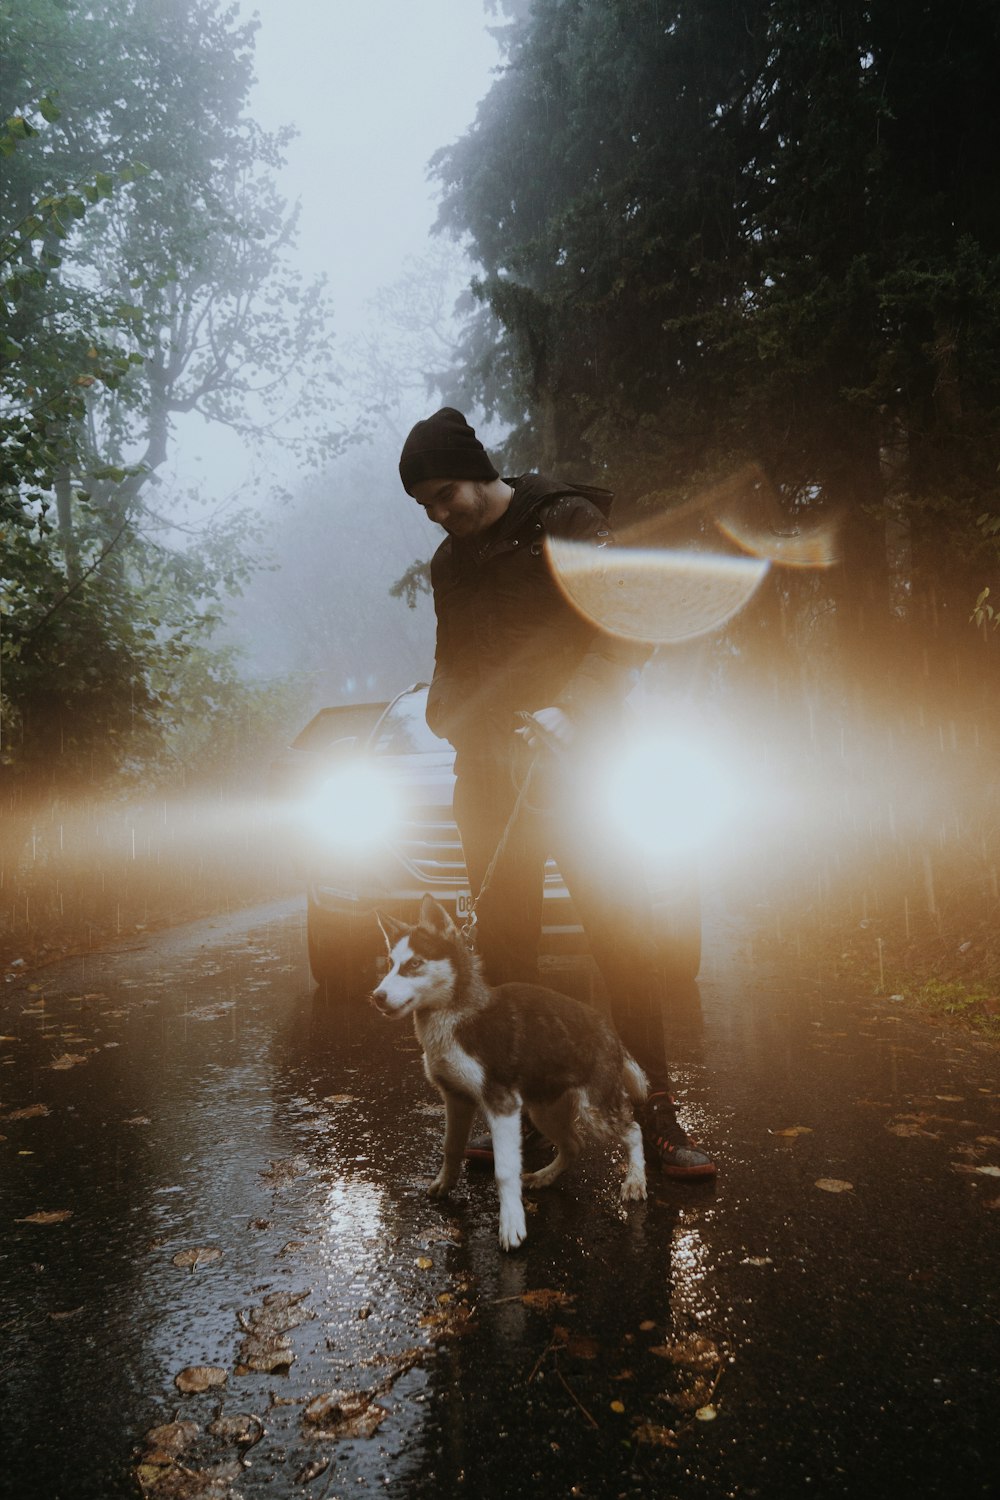 a person riding a motorcycle with a dog on a leash